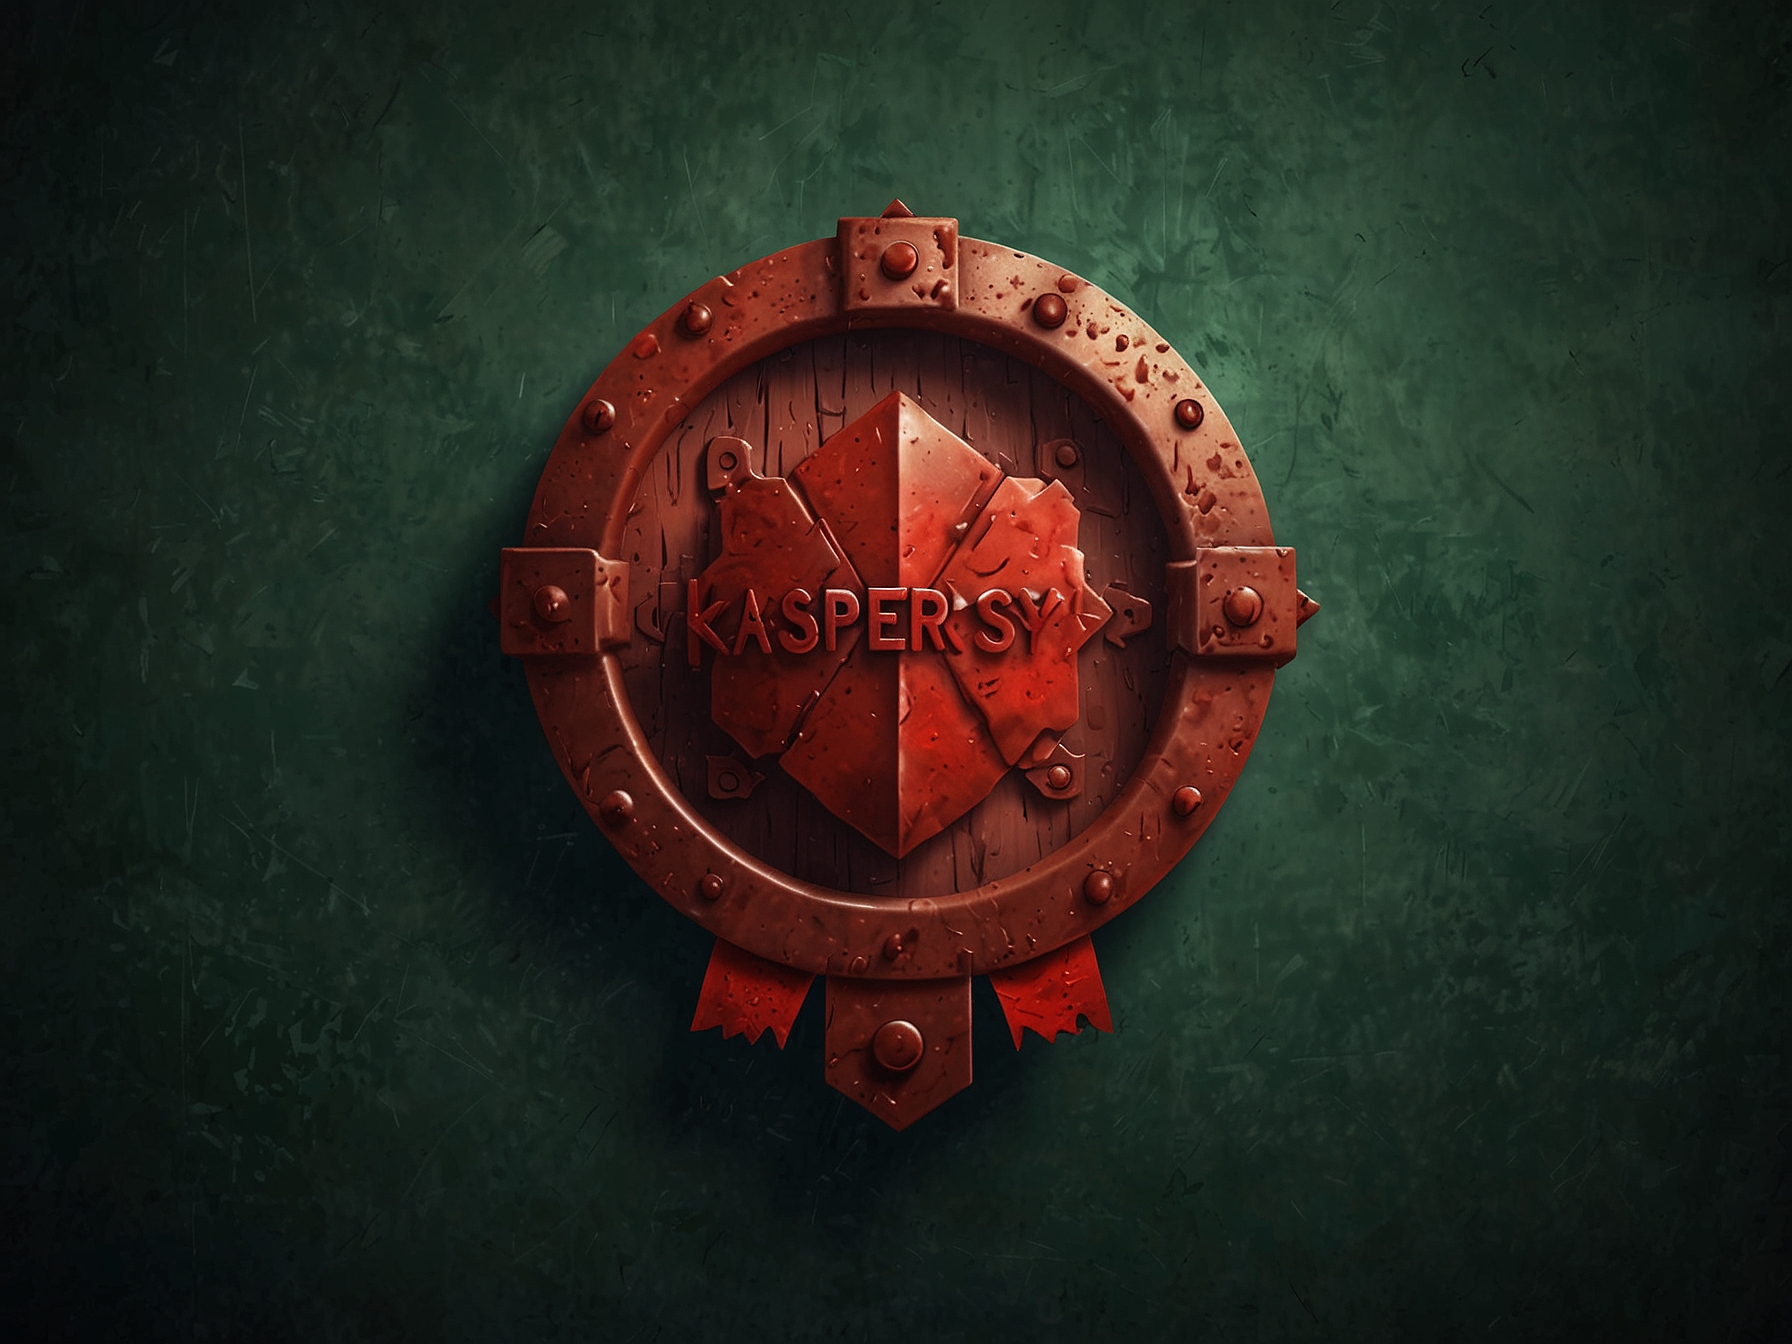 An image depicting the Kaspersky logo with a red prohibition sign, symbolizing the US government's ban on the antivirus software due to national security concerns.